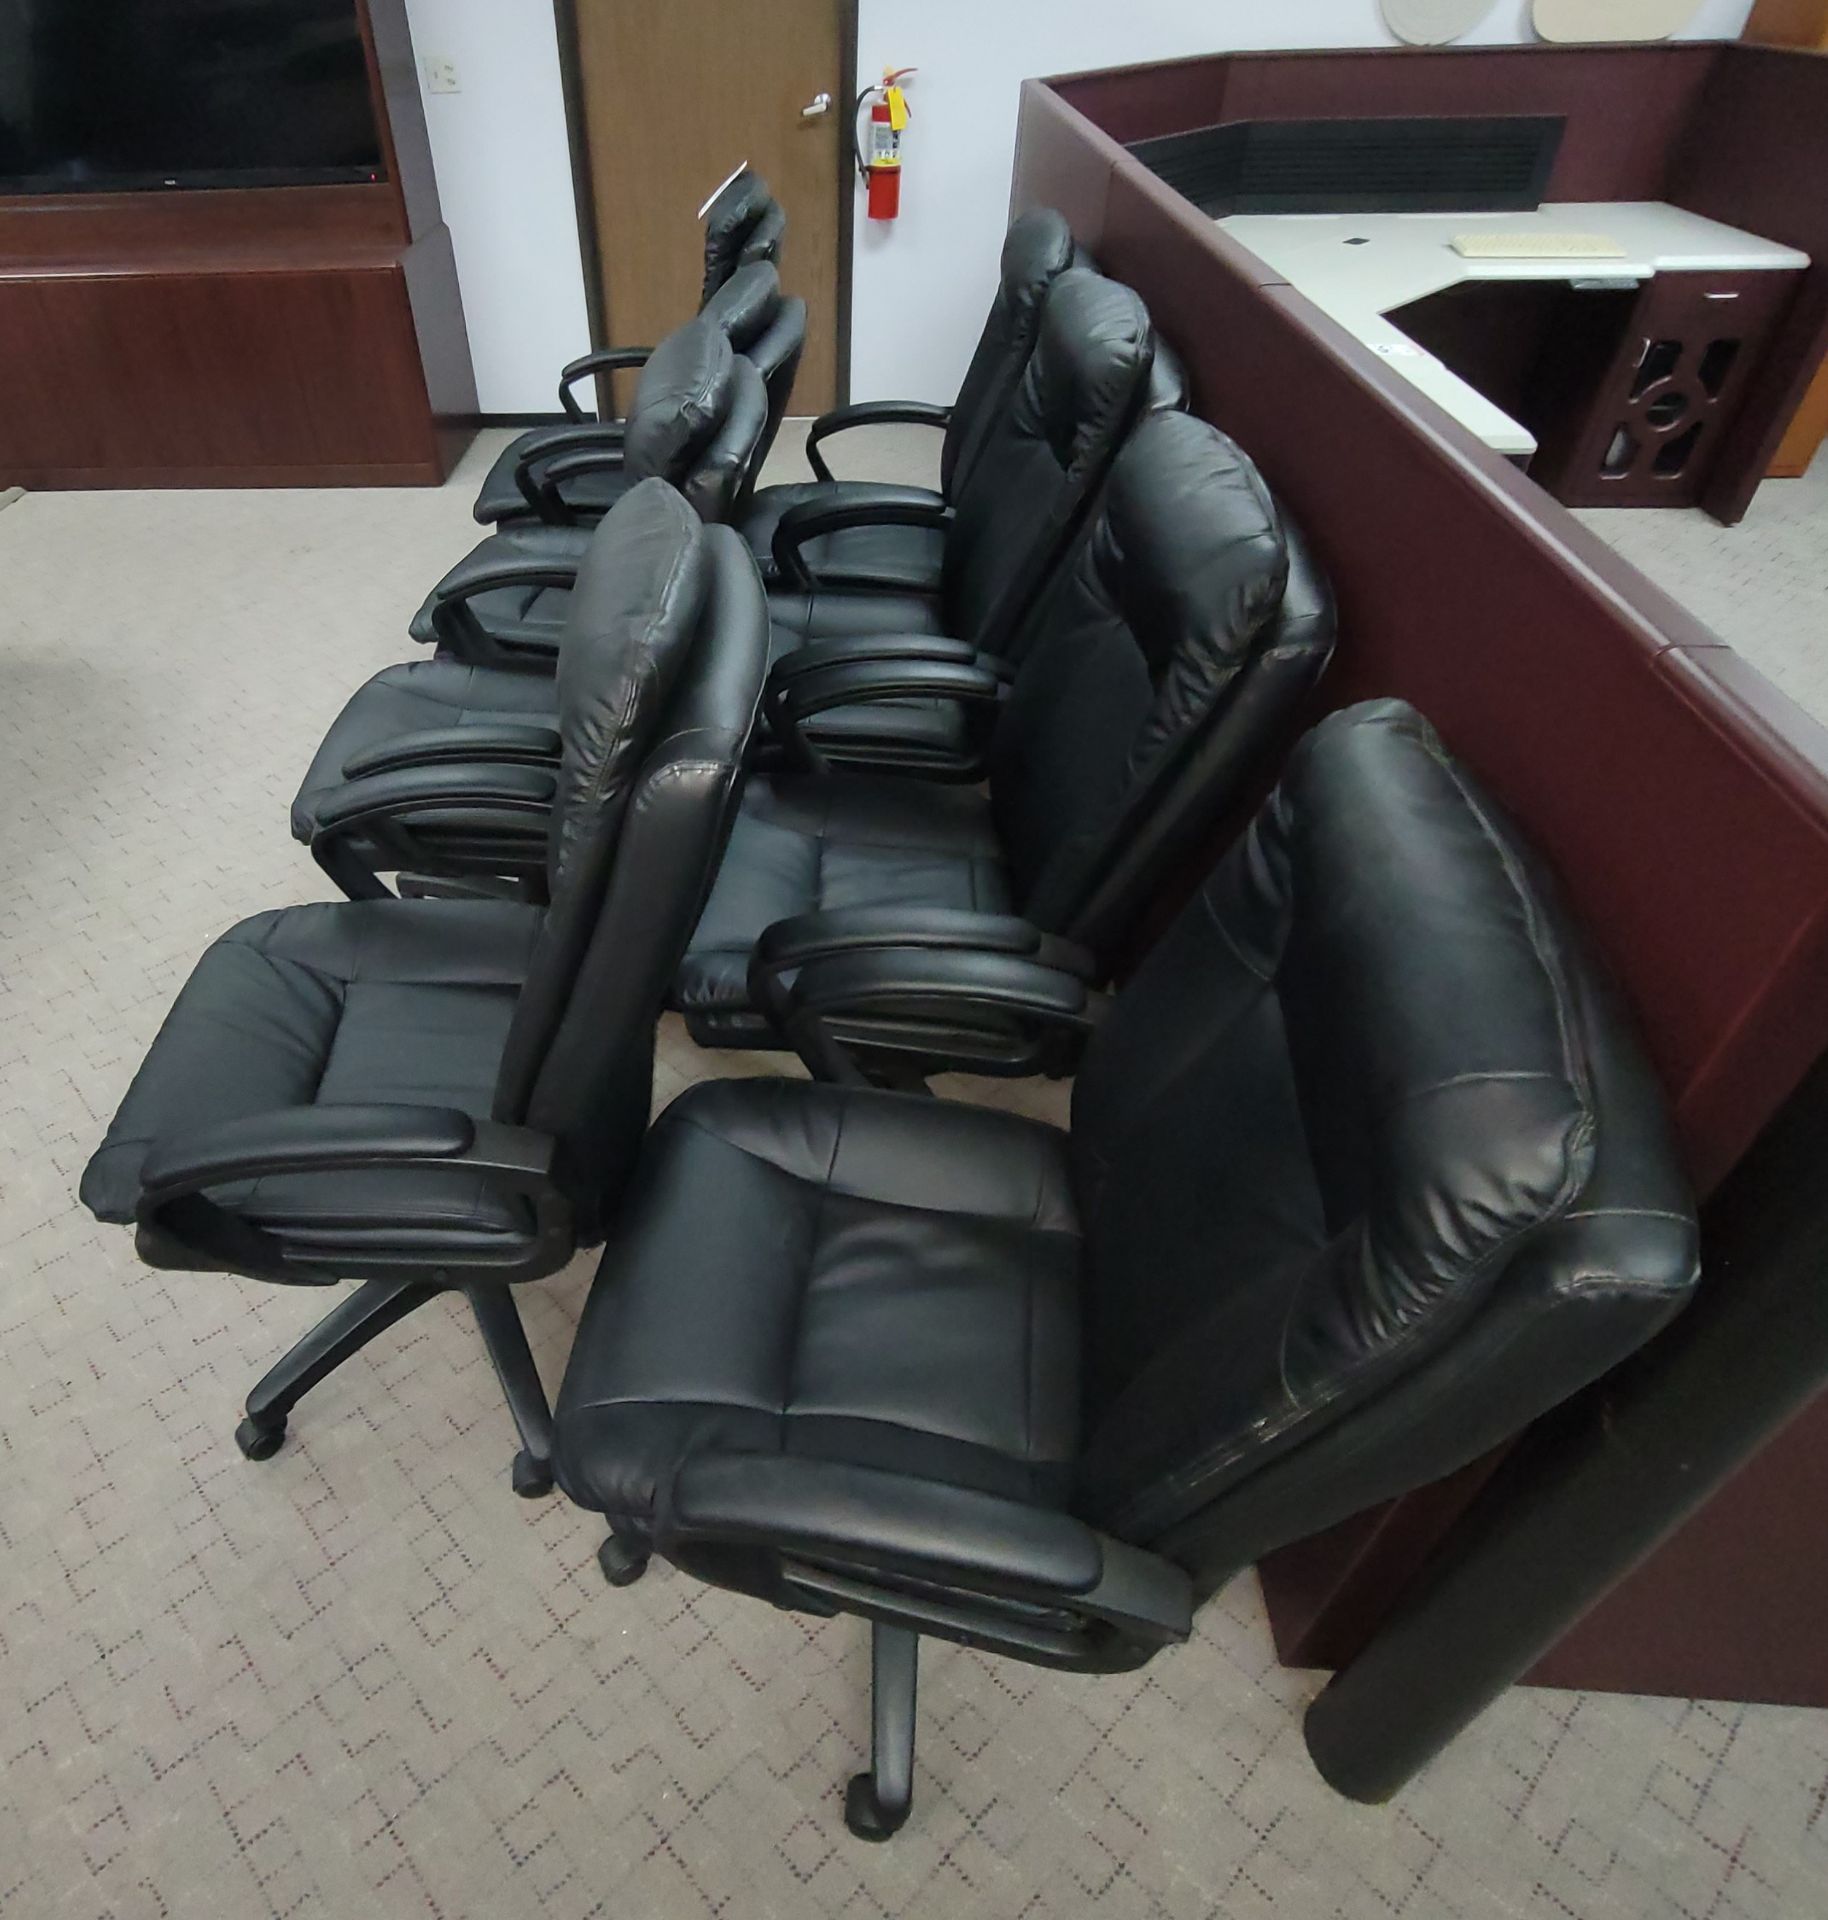 LOT - (8) PLUSH LEATHER HIGH BACK CONFERENCE ROOM CHAIRS W/ PNEUMATIC SEAT ADJUSTMENT - Image 2 of 2